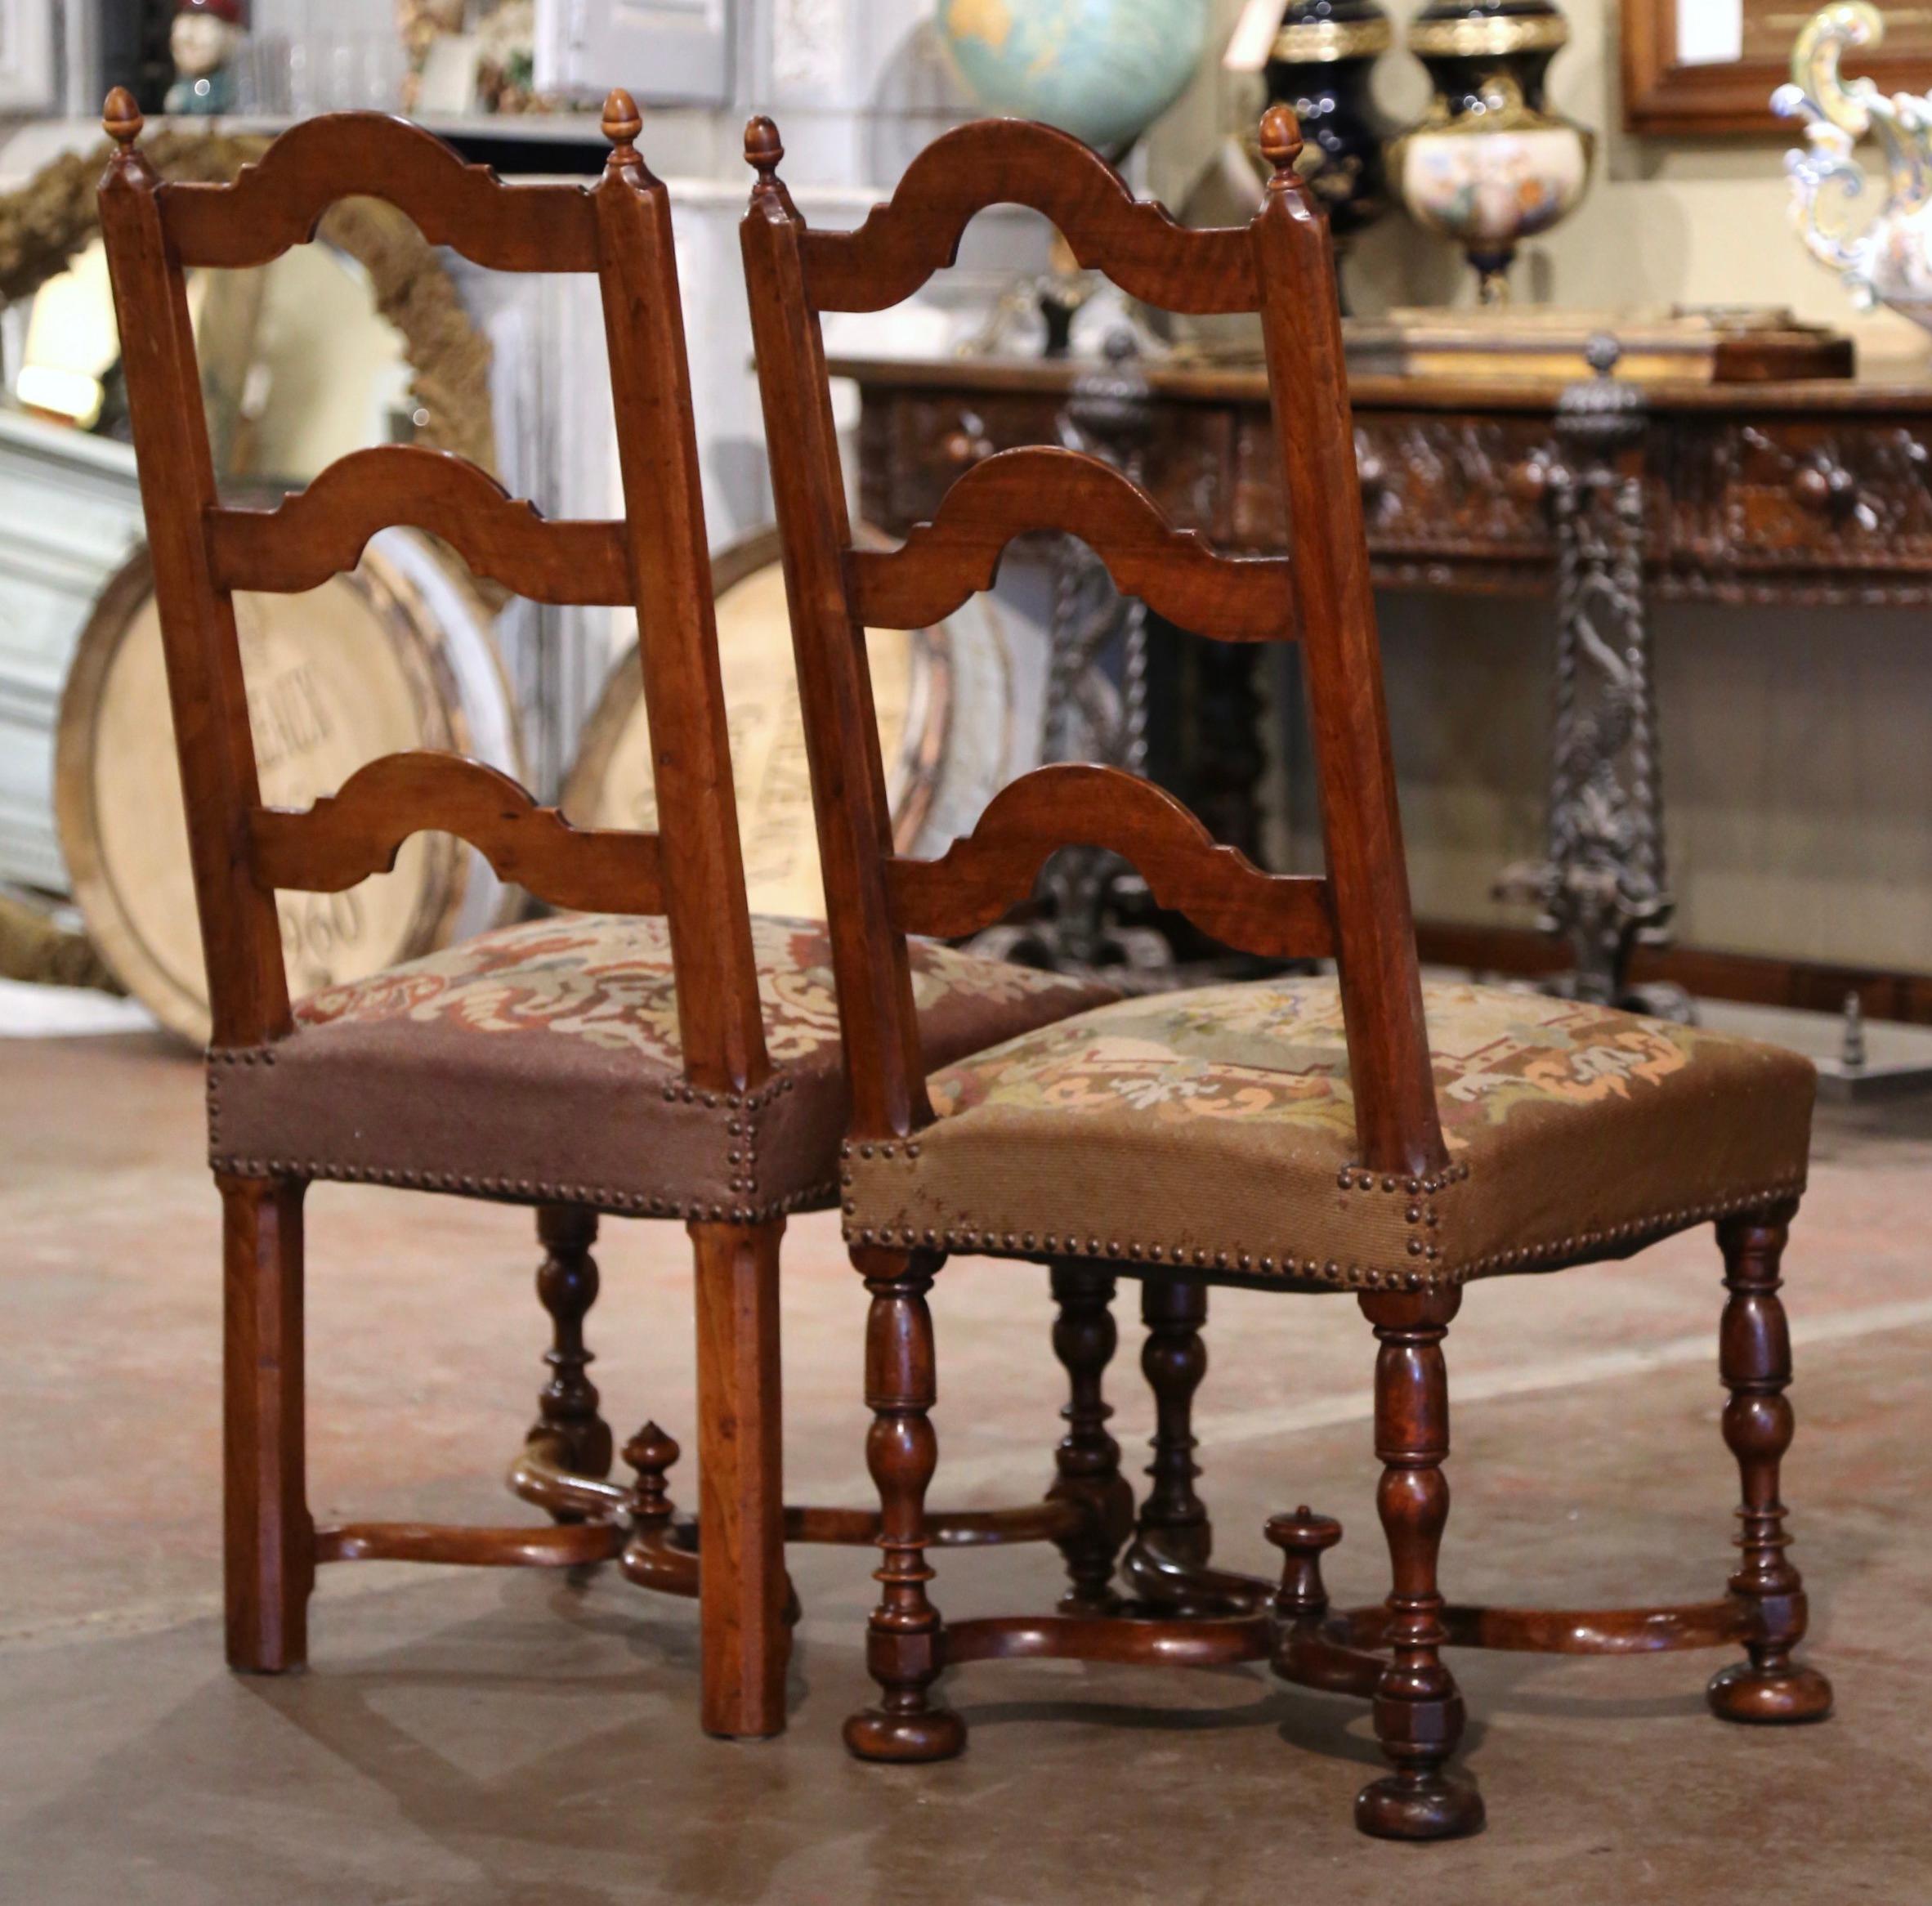 Pair of 19th Century French Carved Walnut Chairs with Needlepoint Upholstery For Sale 4